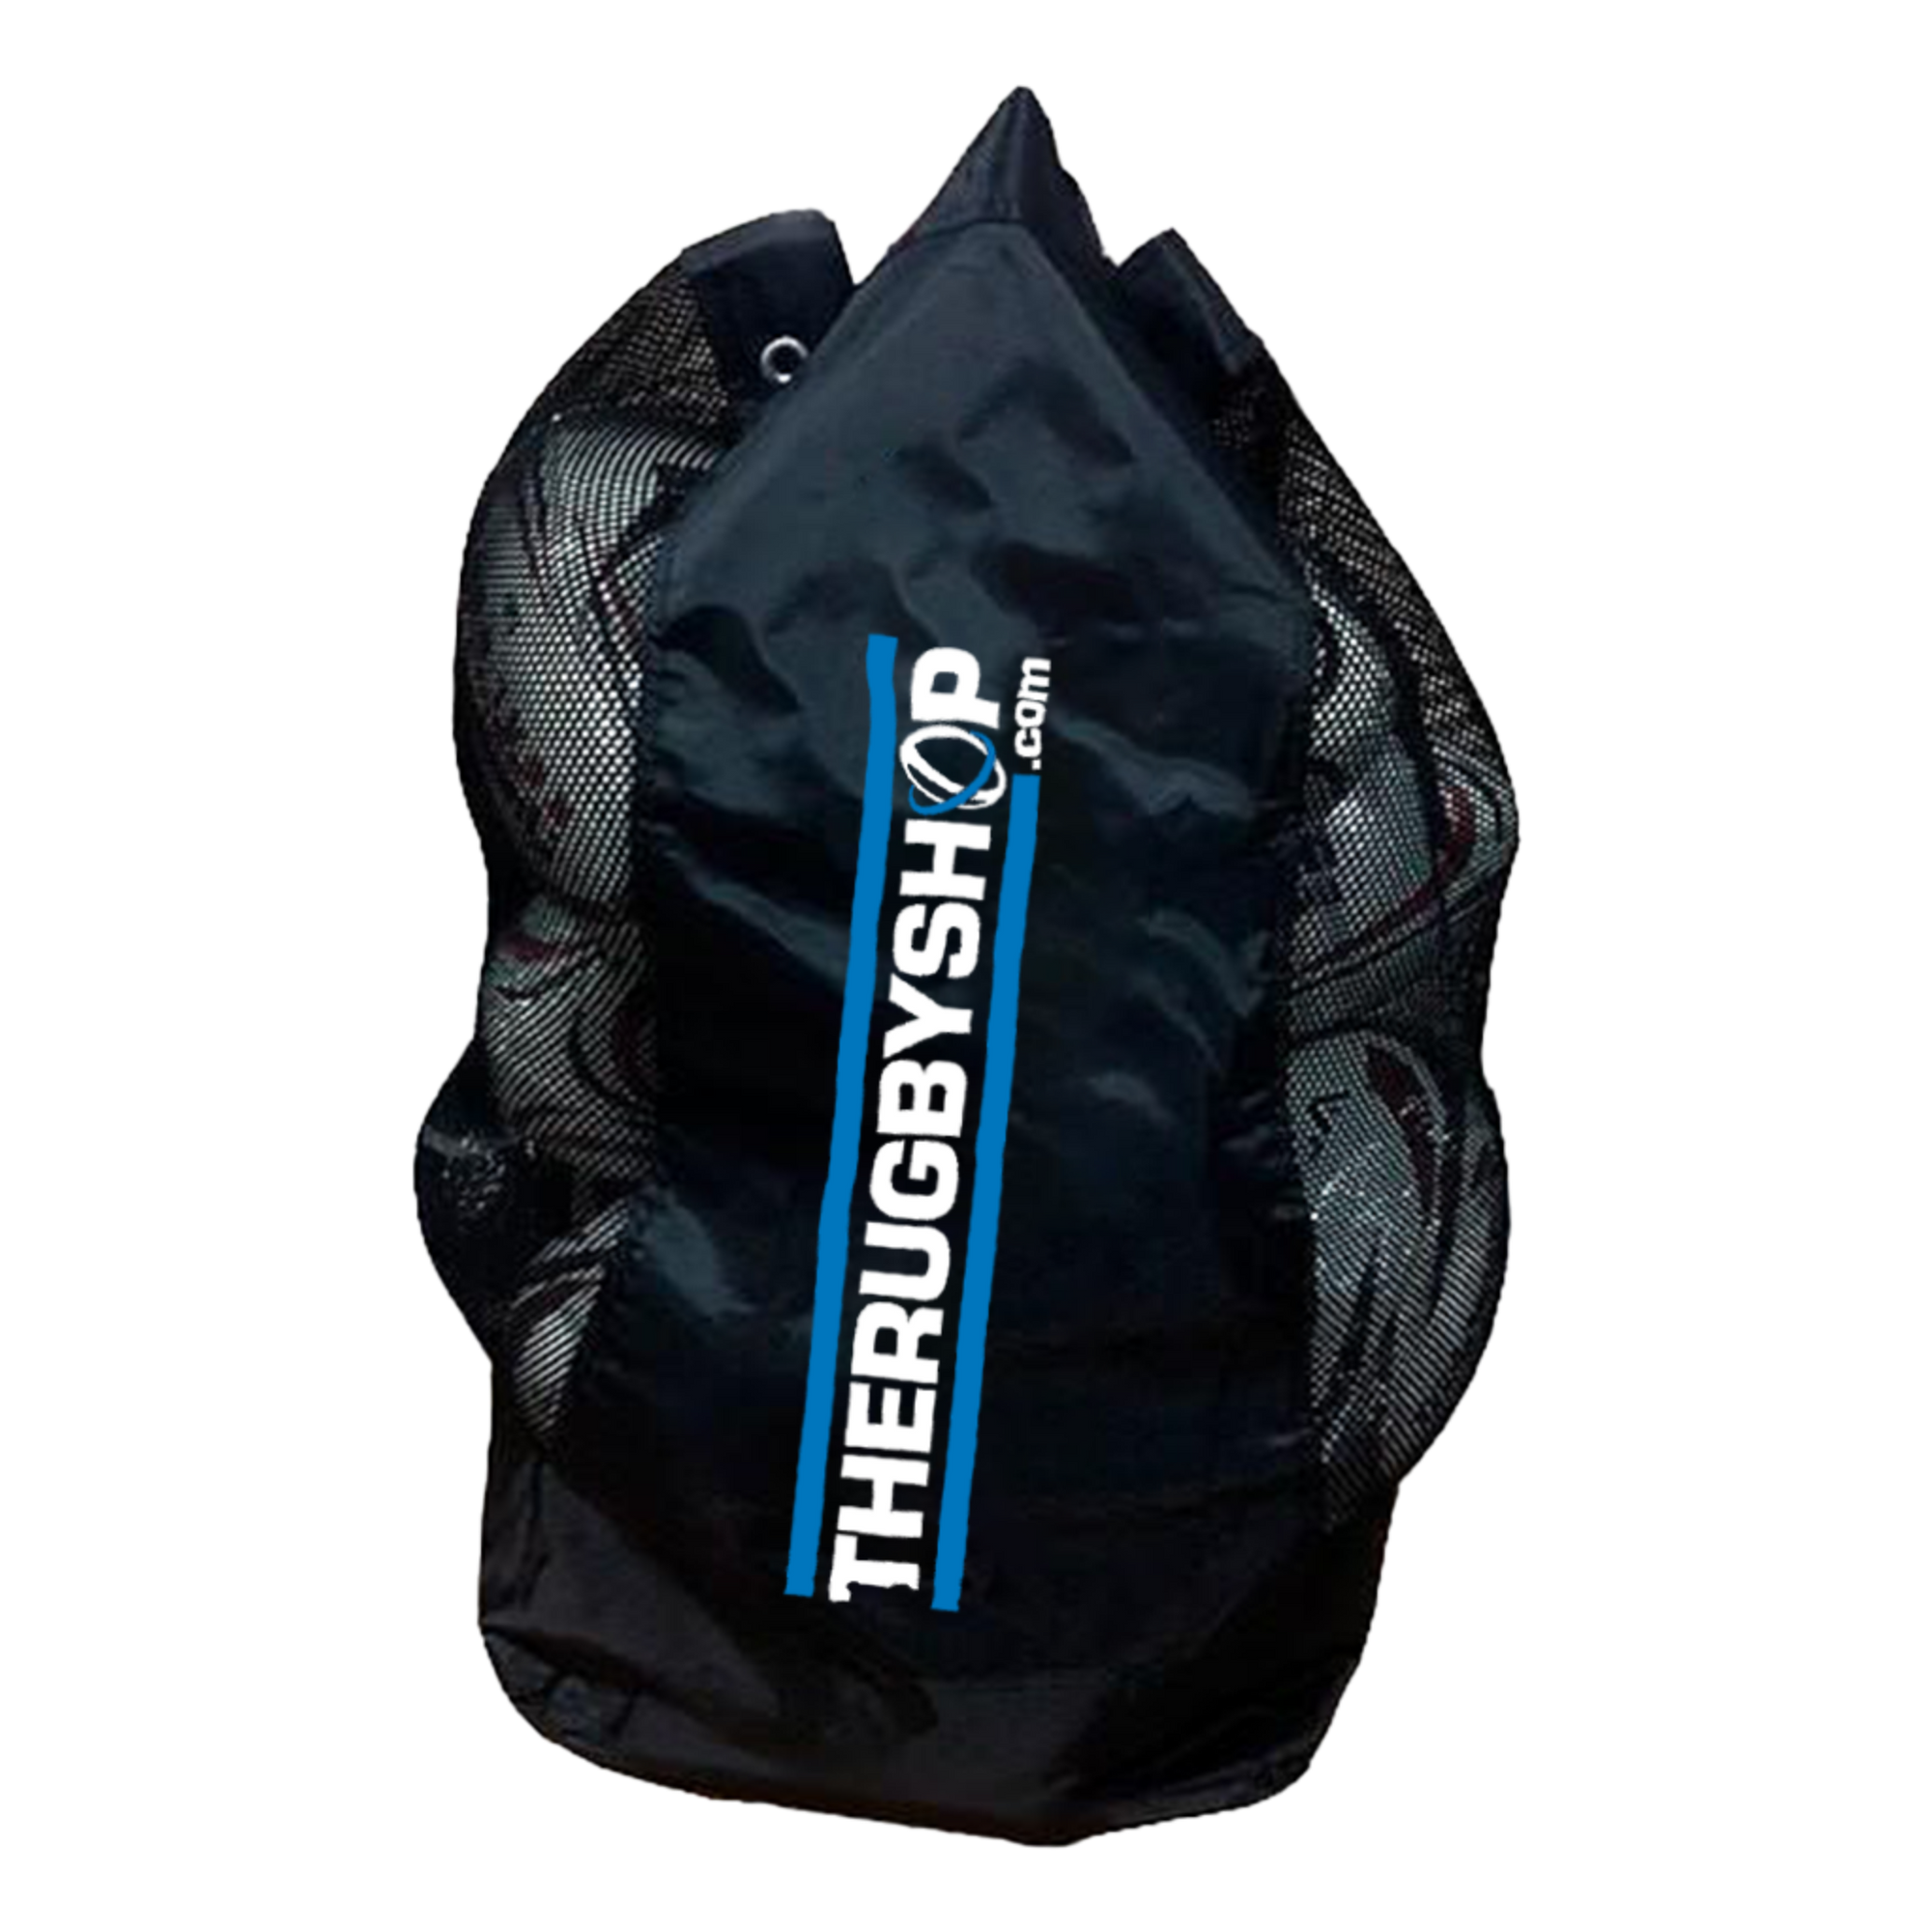 TRS Rugby Ball Bag and 10 Training Ball combo - Holds 12 balls - Black